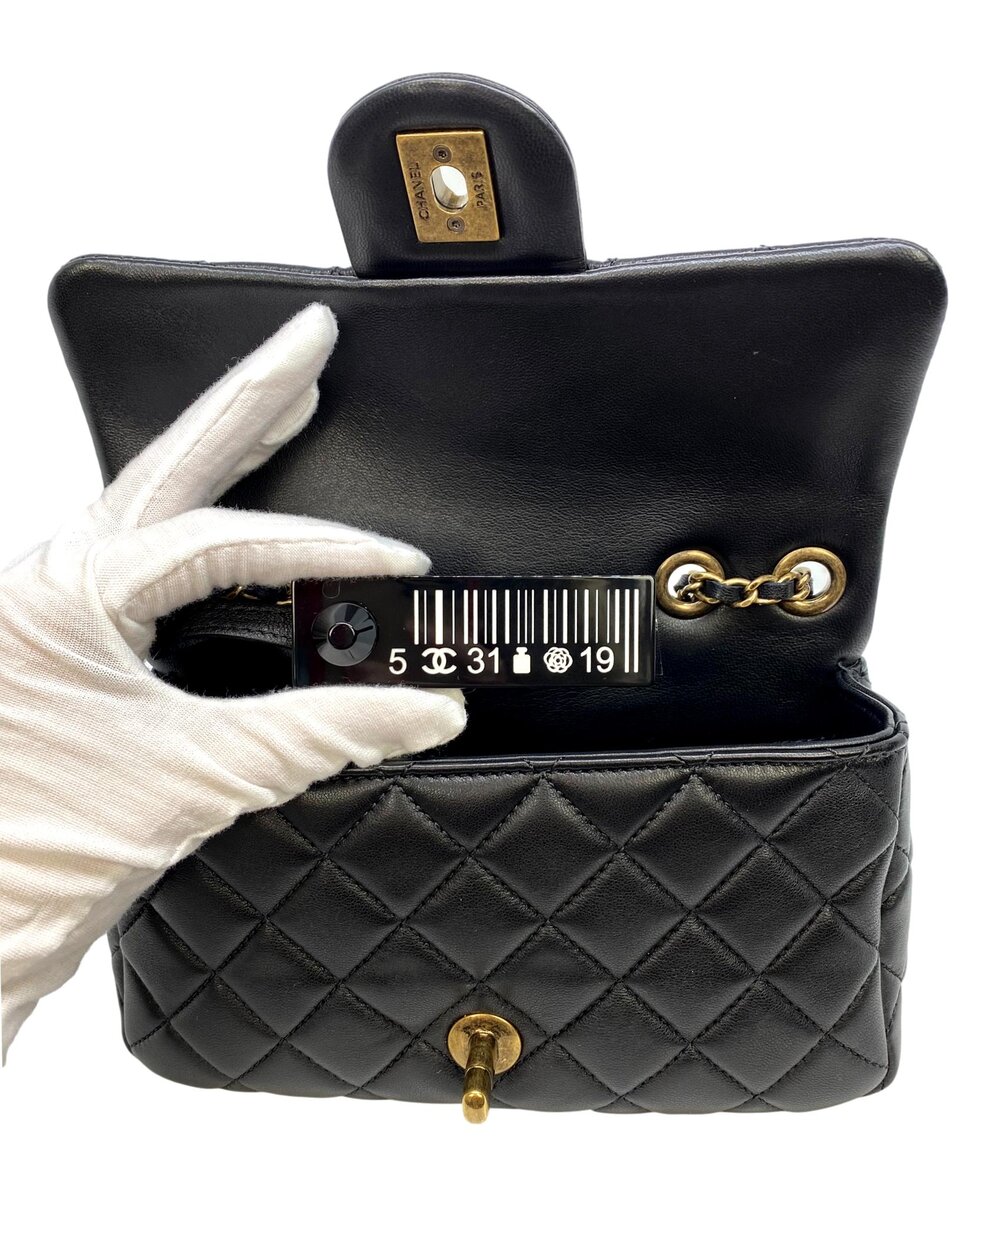 CHANEL Lambskin Quilted Meat Packaged Mini Rectangular Flap Black